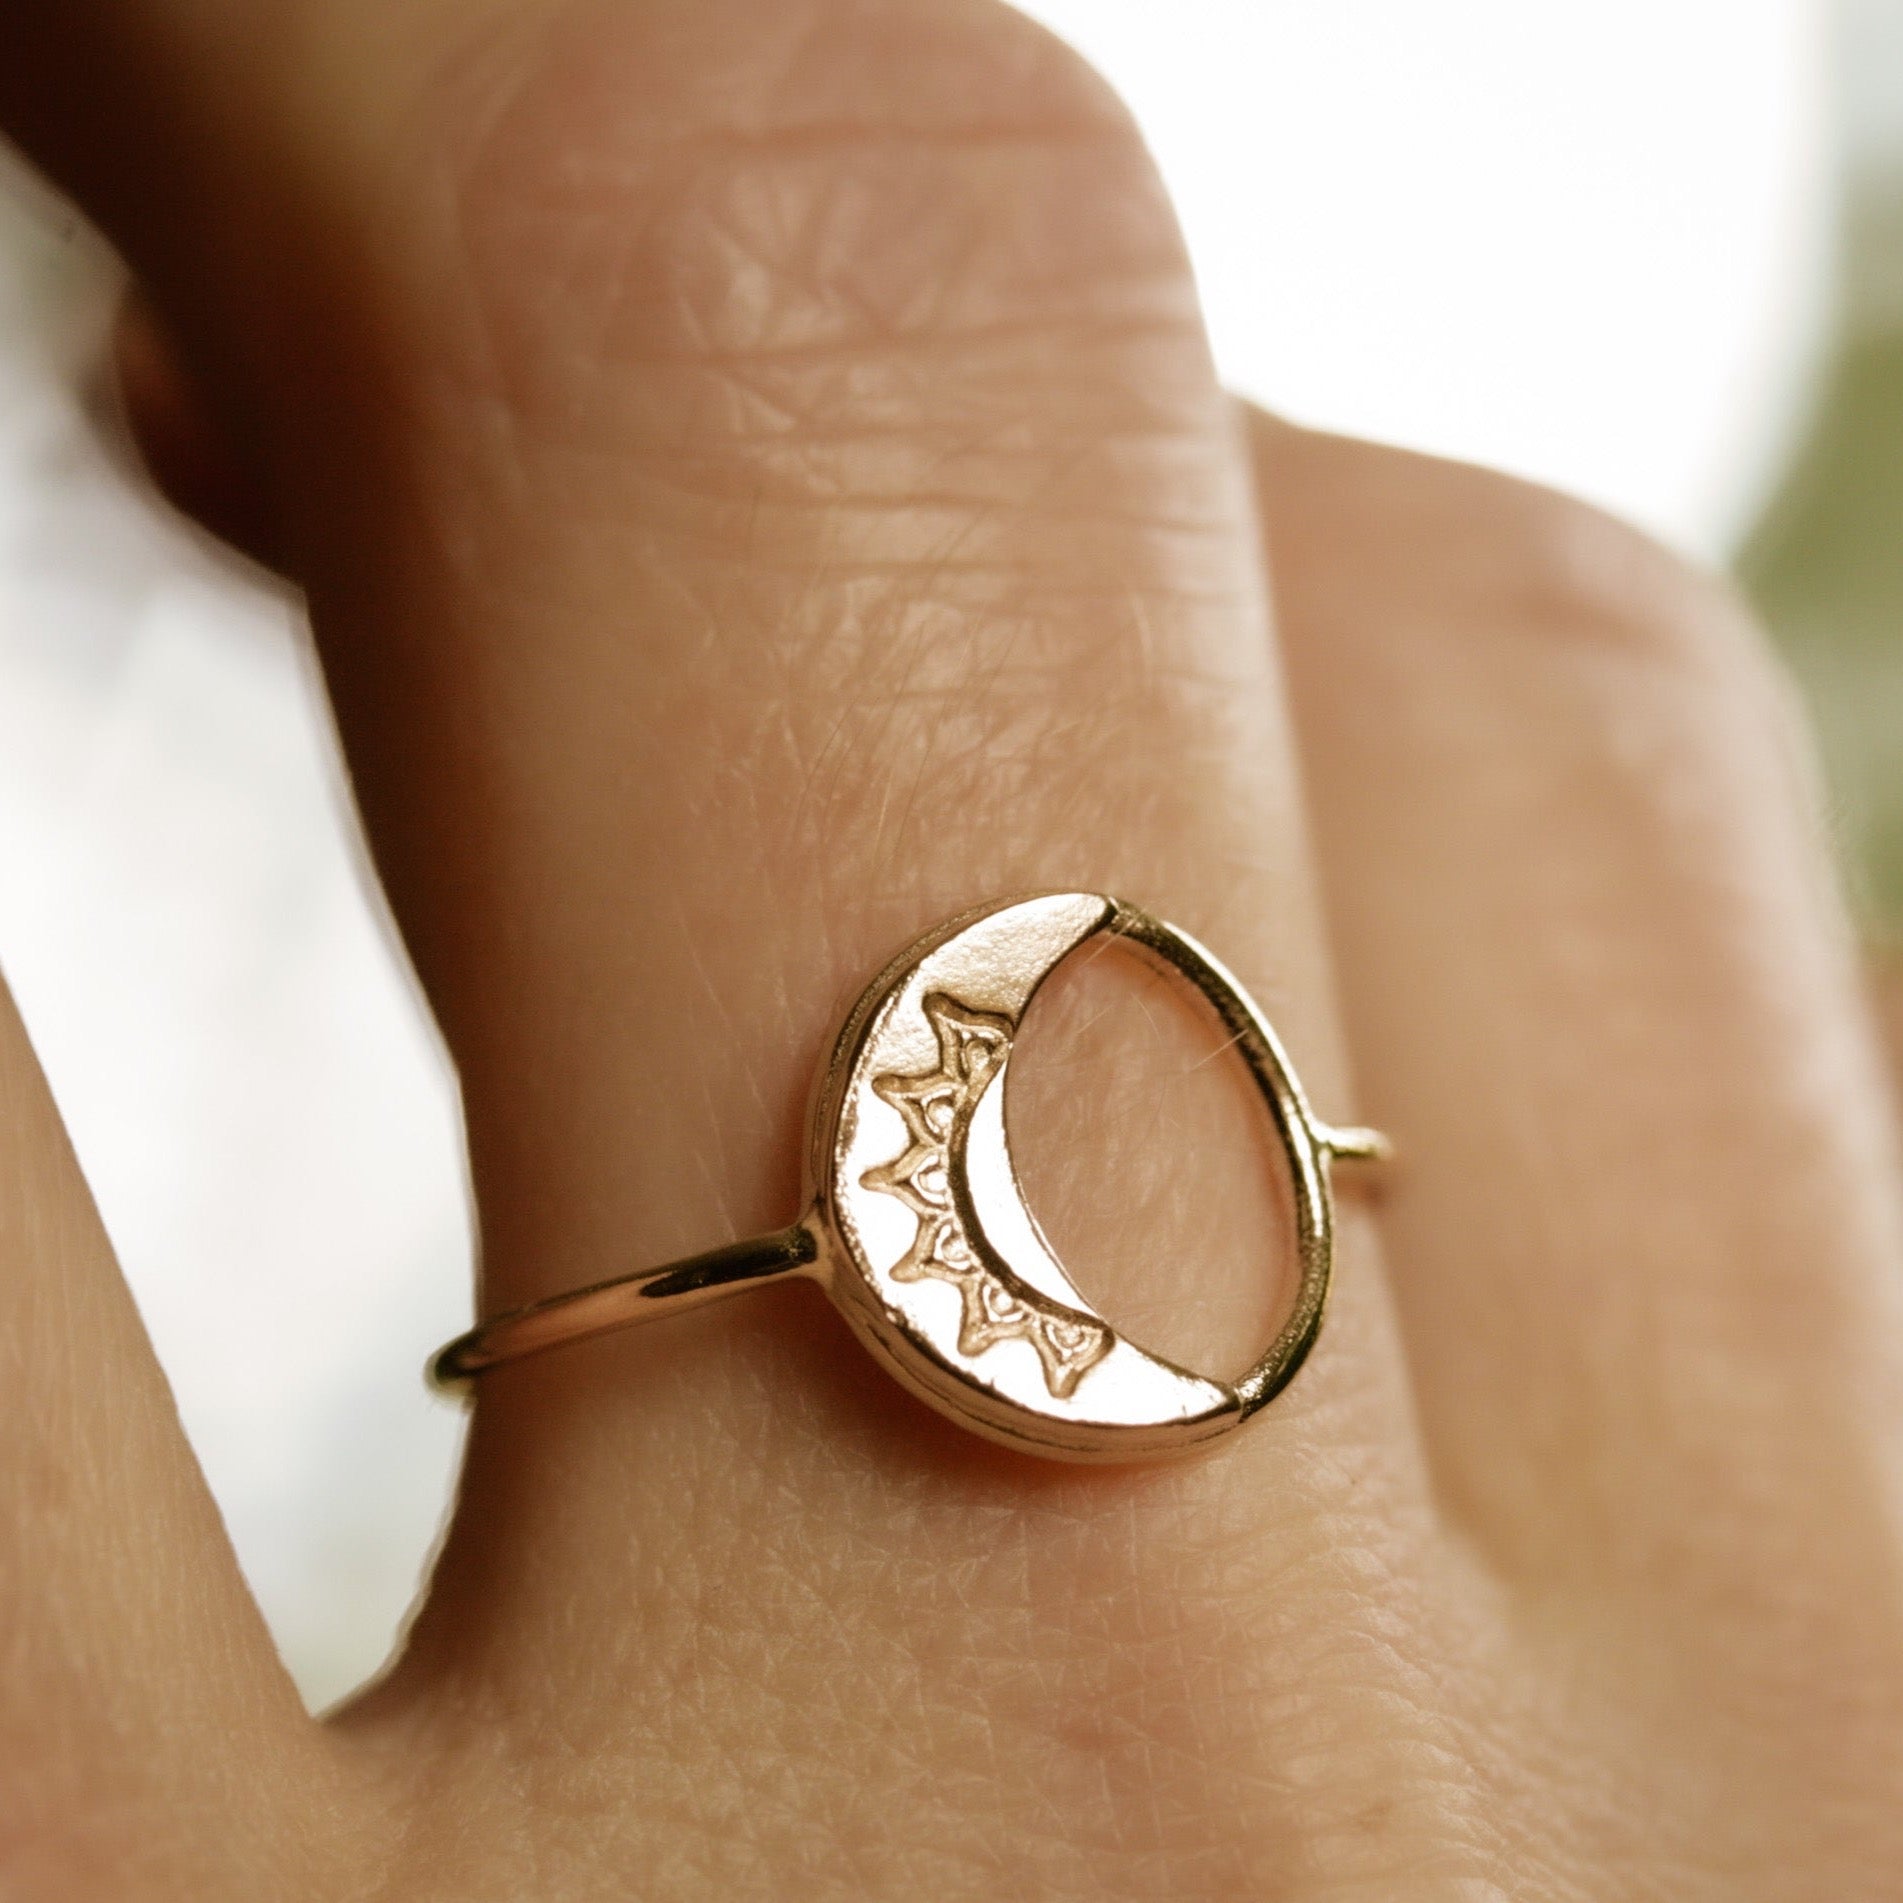 Moon Ring Best Friend Rings Crescent Moon Ring Bague Horn - Etsy New Zealand